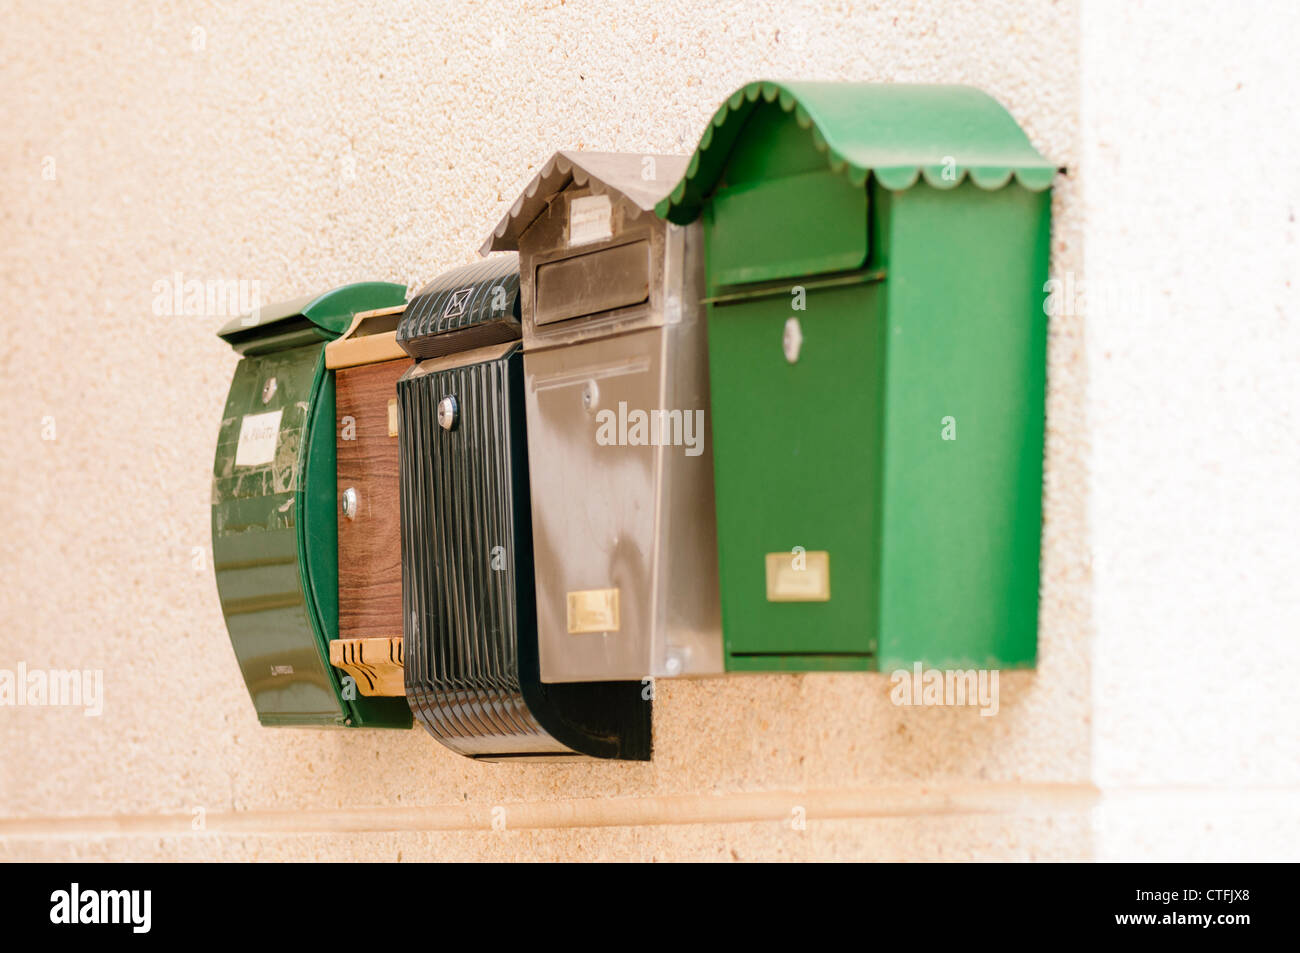 Row of letterboxes on a wall Stock Photo